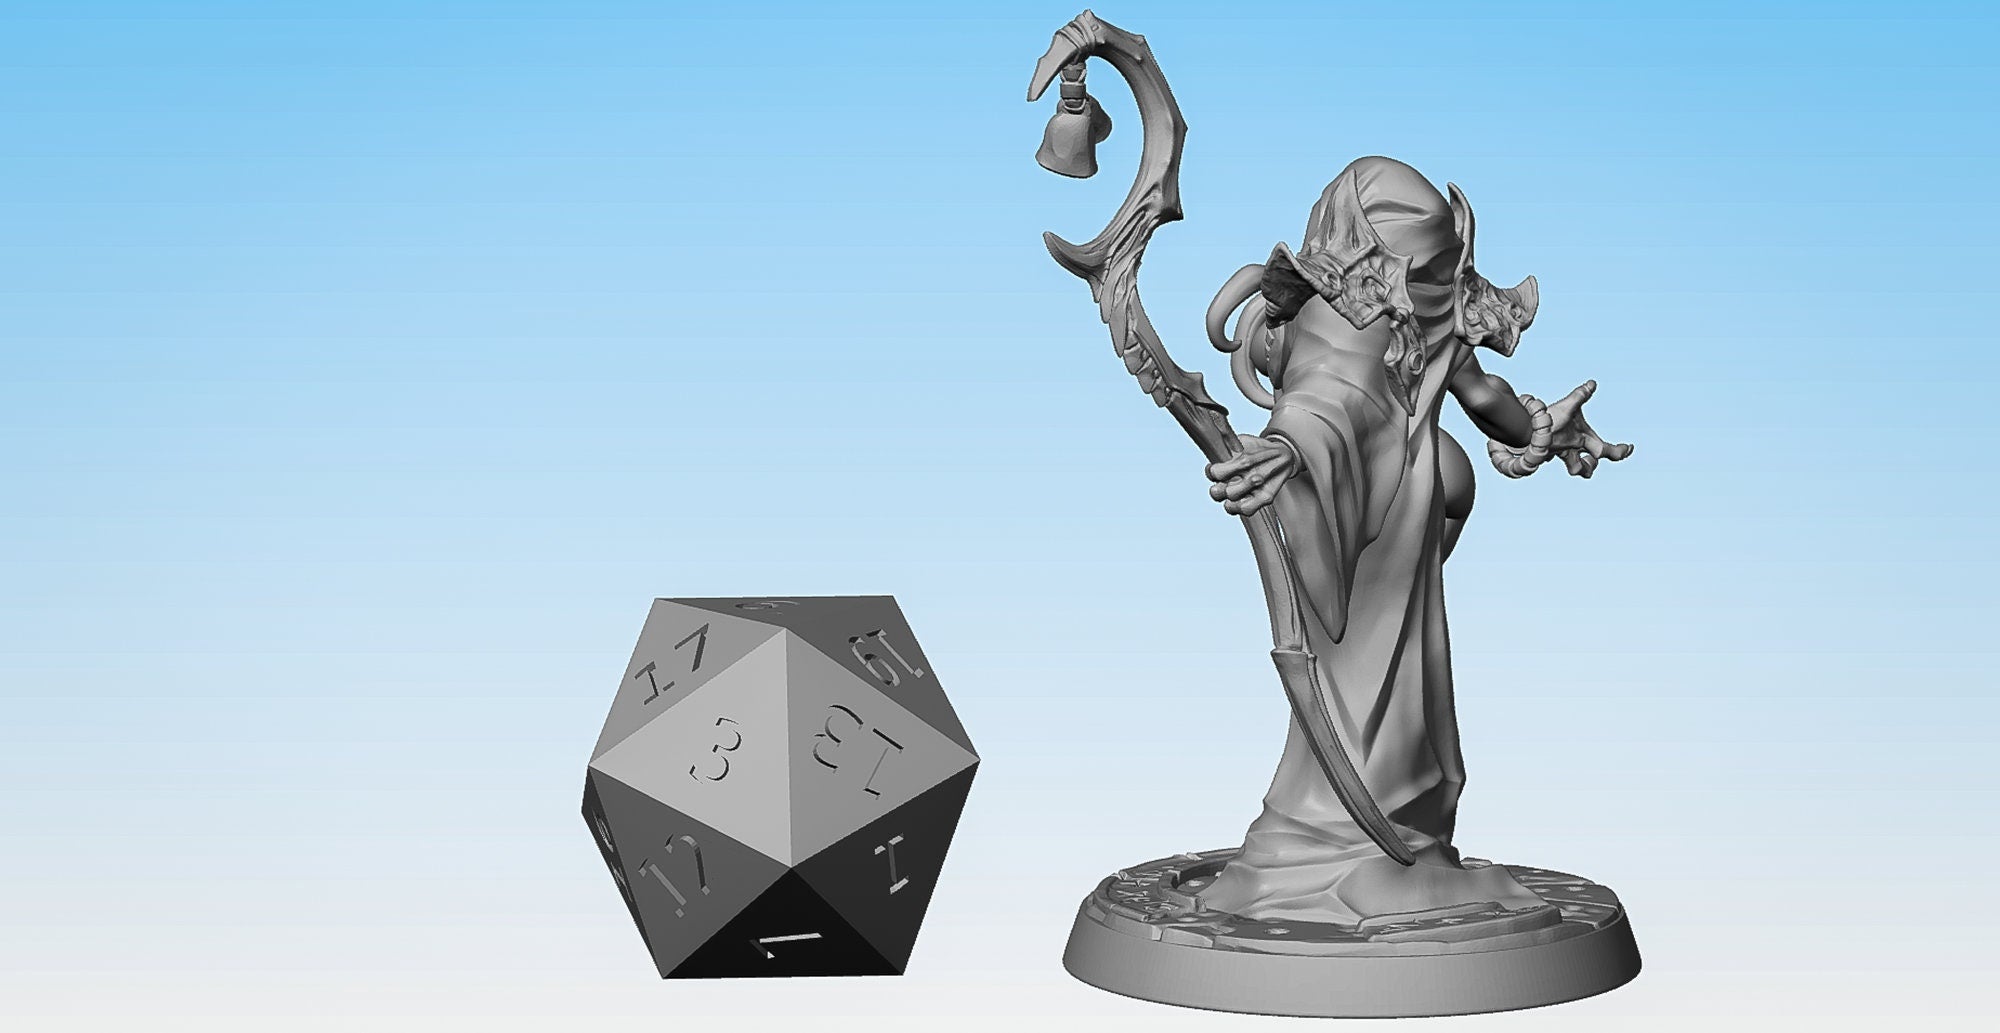 SEXY PINUP "Slithis the Enchantress" Mindflayer Illithid (2 Versions & Sizes) | Dungeons and Dragons | DnD | Pathfinder | Tabletop | RPG-Role Playing Miniatures